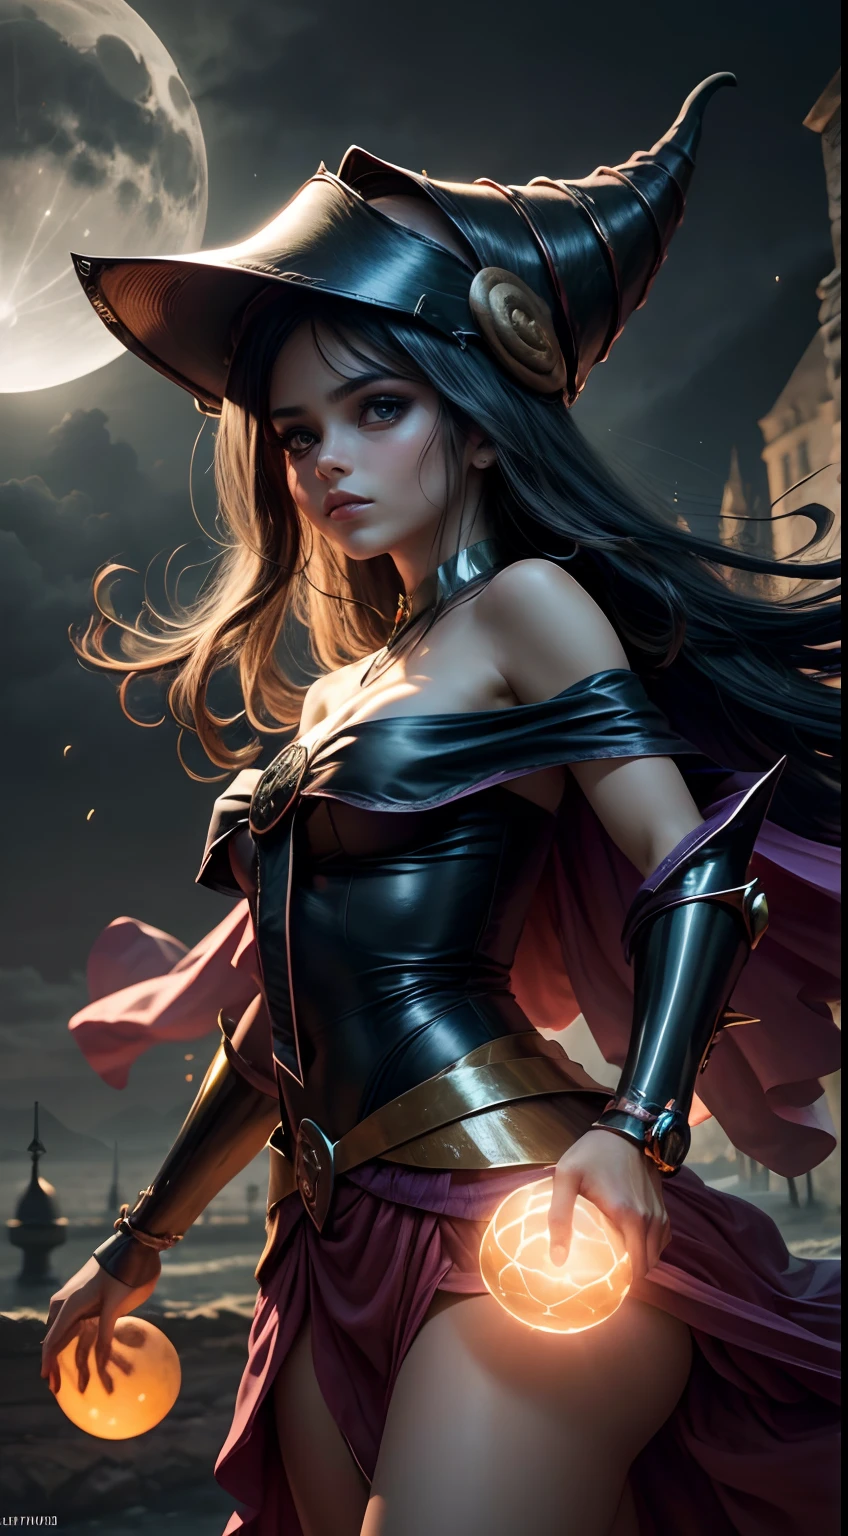 (The best quality,4k,8k,High Resolutions,Masterpiece:1.2),ultra detailed,(realist,fotorrealist,fotorrealist:1.37), portrait, sorceress, Moonlight, pumpkin, Resplandor creepy, creepy, atmospheric, charming, Oscuro y charming, golden hour, halloween, MYSTICAL, magical, witch, witchcraft, fascinating, ethereal, Mystical fog, Mysterious, haunting, Grim figures, Bosque charming, Magician, Moonbeam, Mystical aura, bewitching eyes, Captivating, from another world, witchcraft, moonlit sky, enchanted night, Guarida de la sorceress, Calabaza emwitchda, Moonlit silhouette, mystical powers, Mysterious atmosphere, spell caster, Magic in the moonlight, hauntingly beautiful, enchantment in the air, Ethereal Beauty.